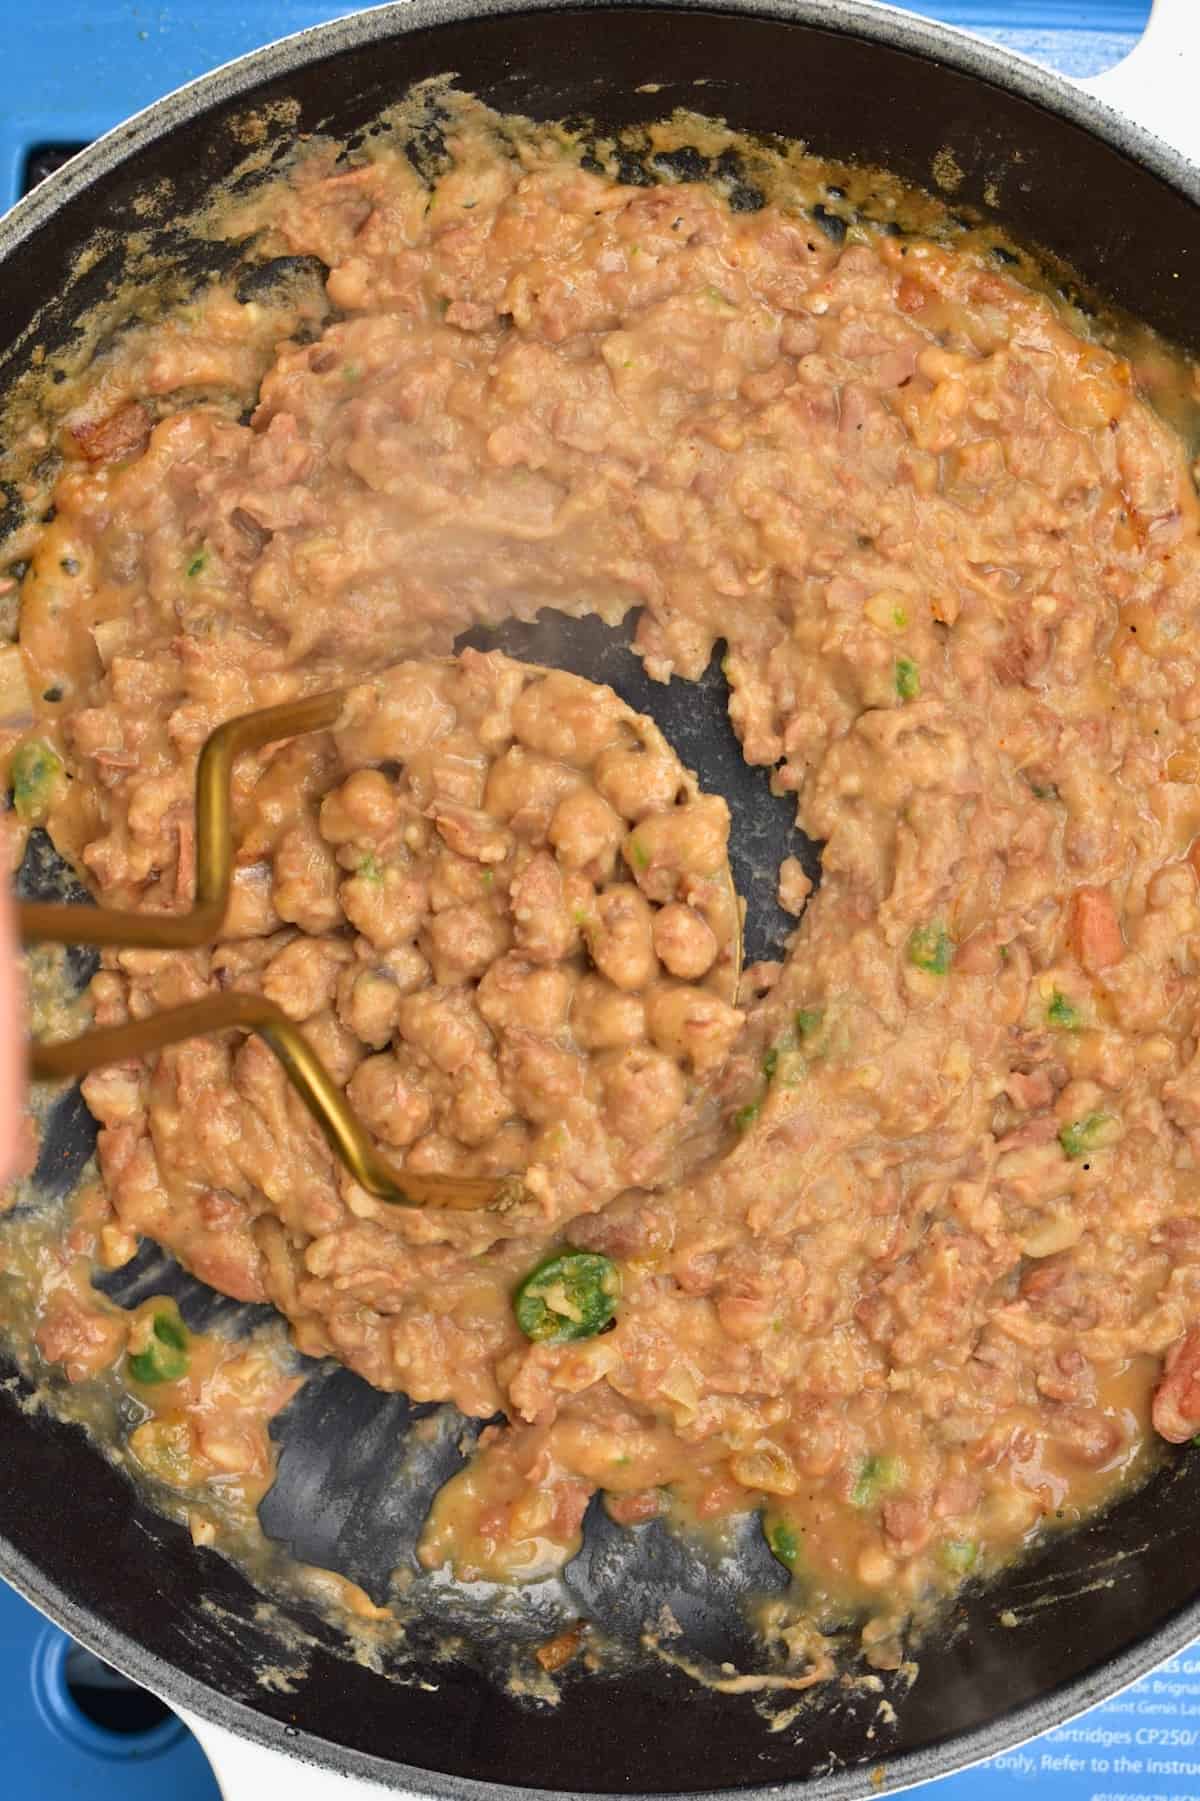 How to Make Refried Beans (Vegan Refried Beans) - Alphafoodie